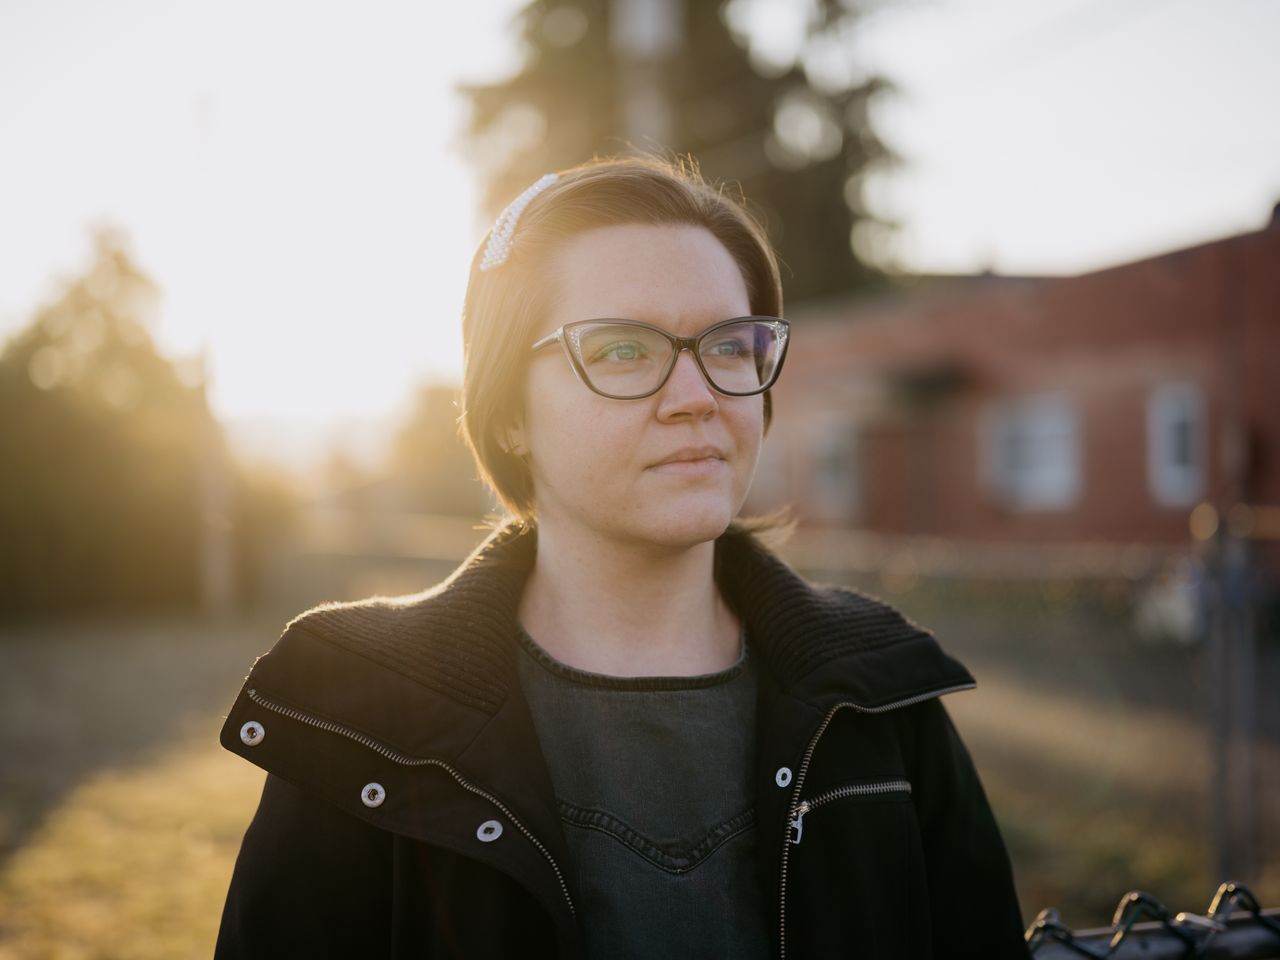 Chelsea Rutter, seen outside her home in Port Angeles, Washington, is challenging the legality of a noncompete clause used by her former employer, Bright Horizons.